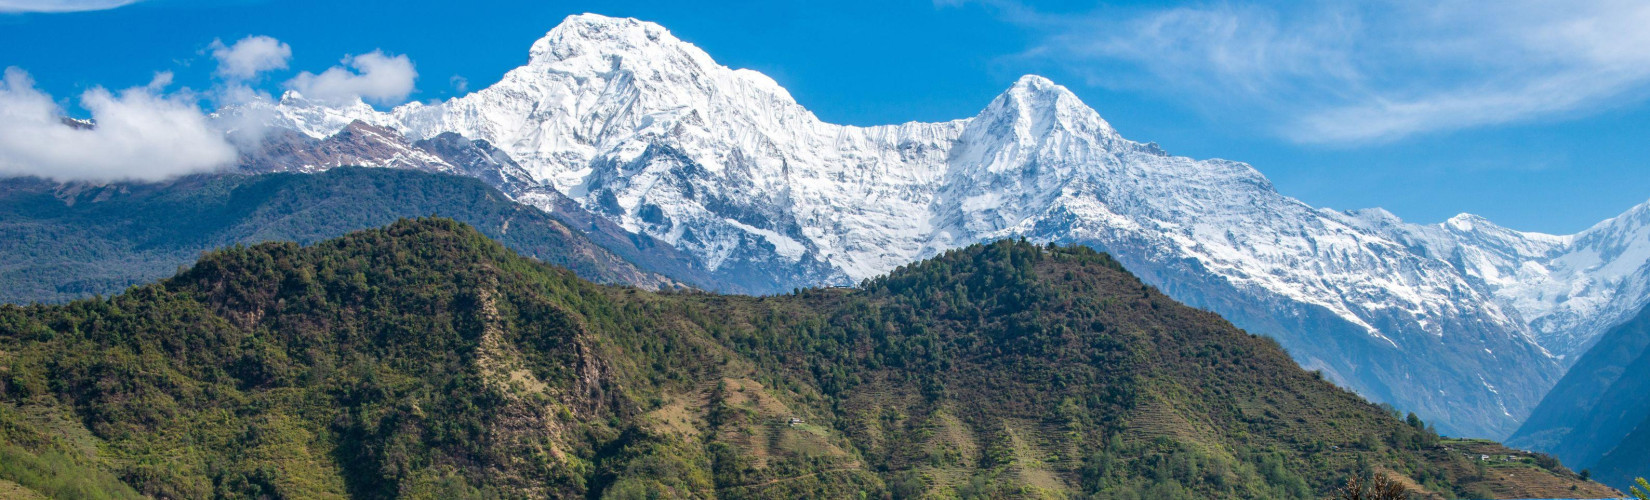 Top 10 Must-See Destinations in Nepal for Luxury Travelers